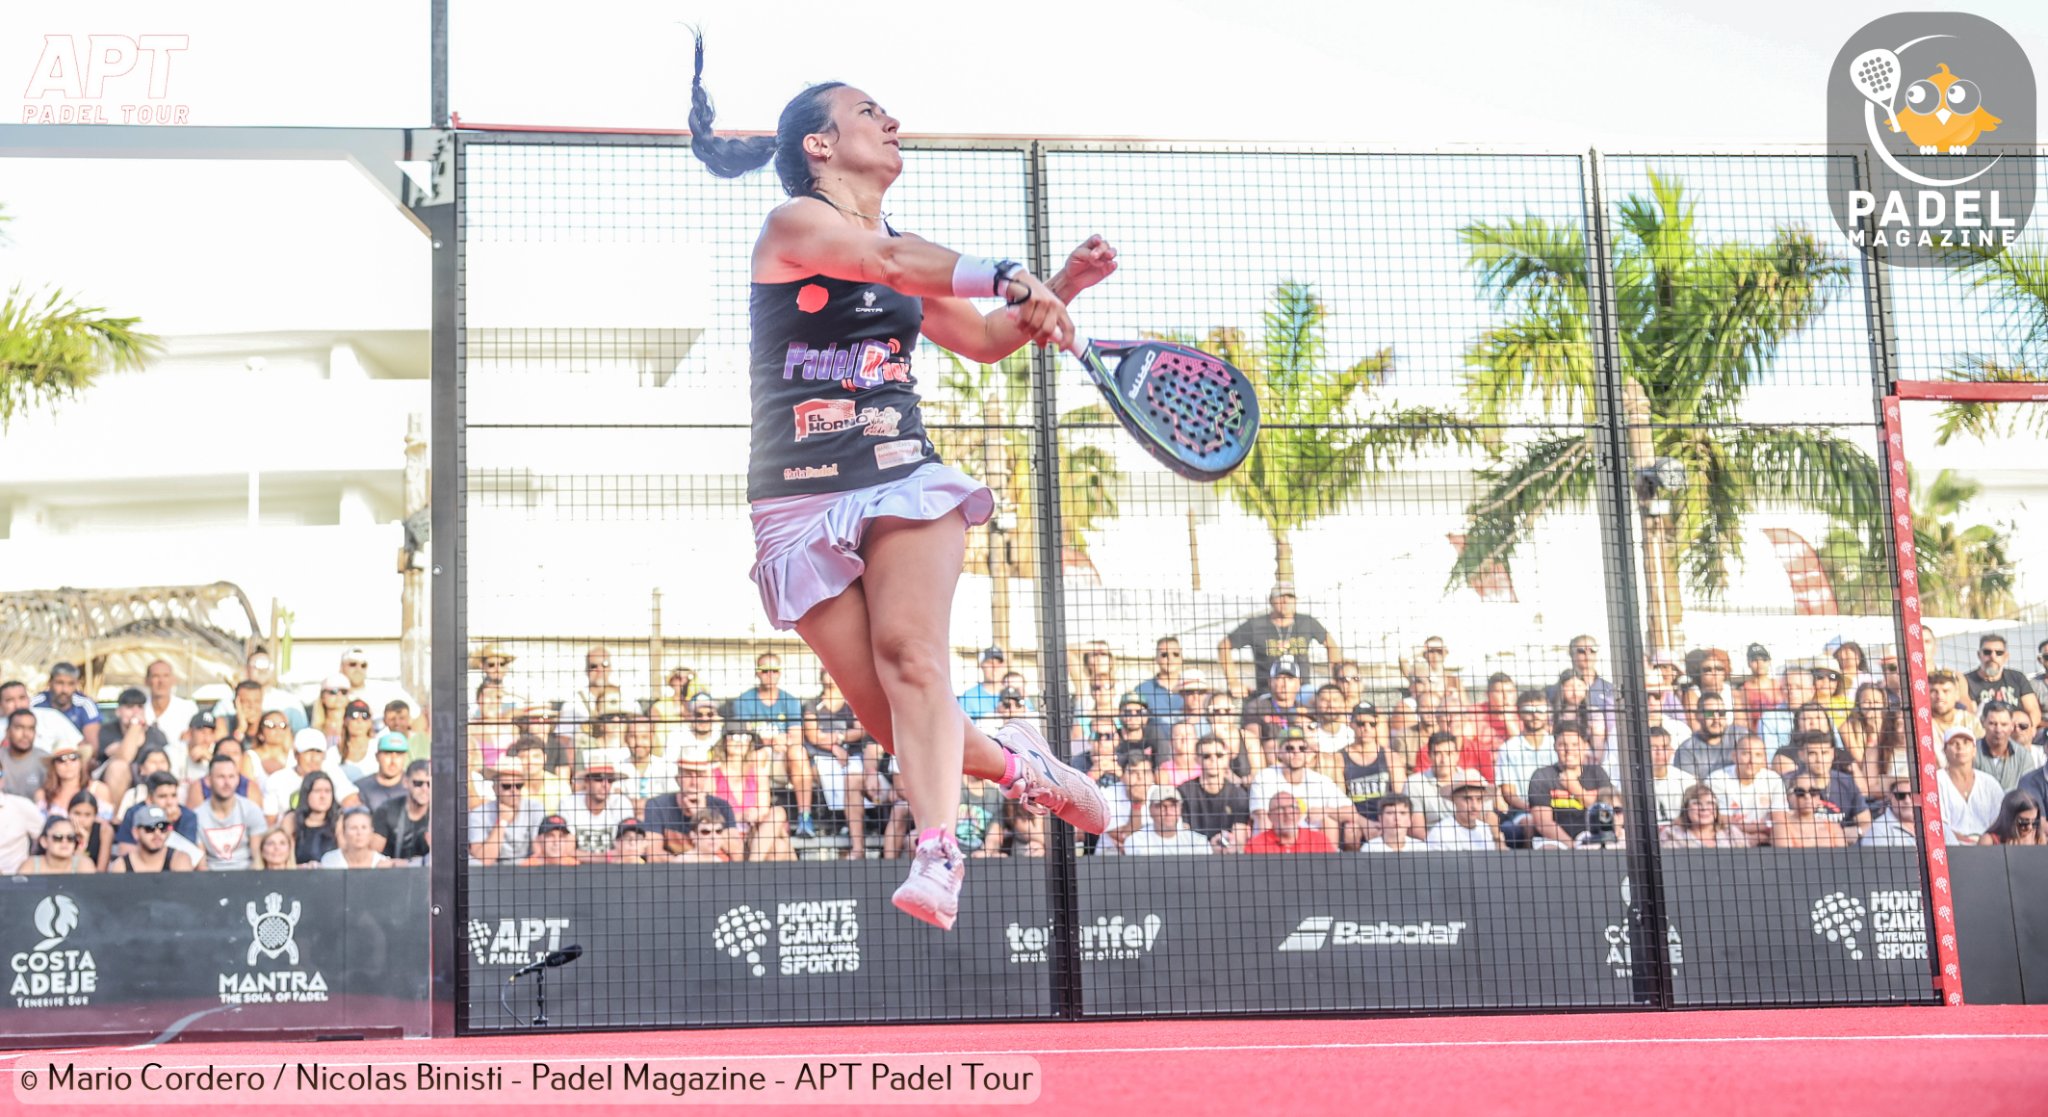 Prepare well to perform better padel